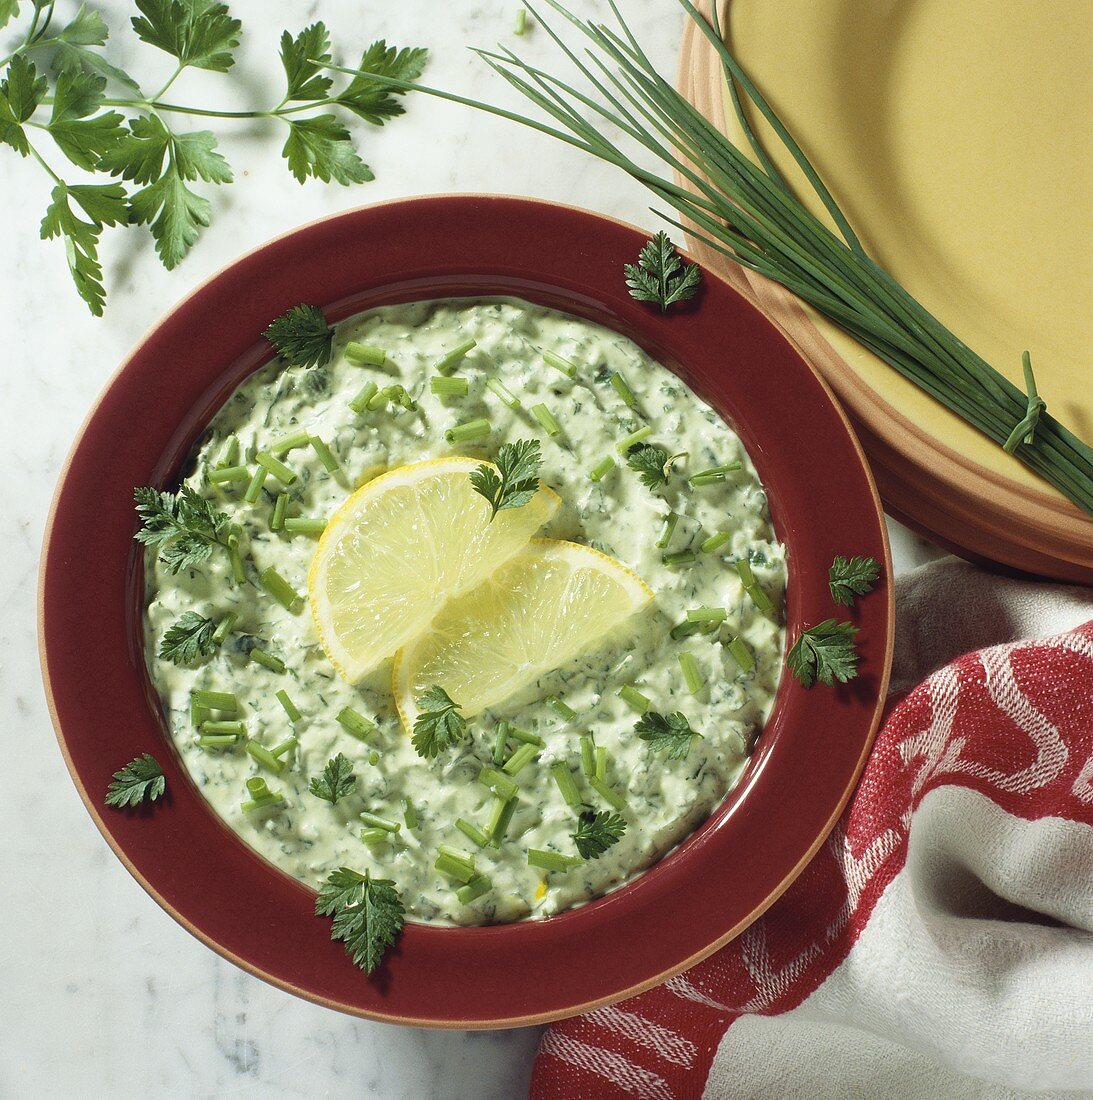 Green sauce with chives, chervil & lemon slices